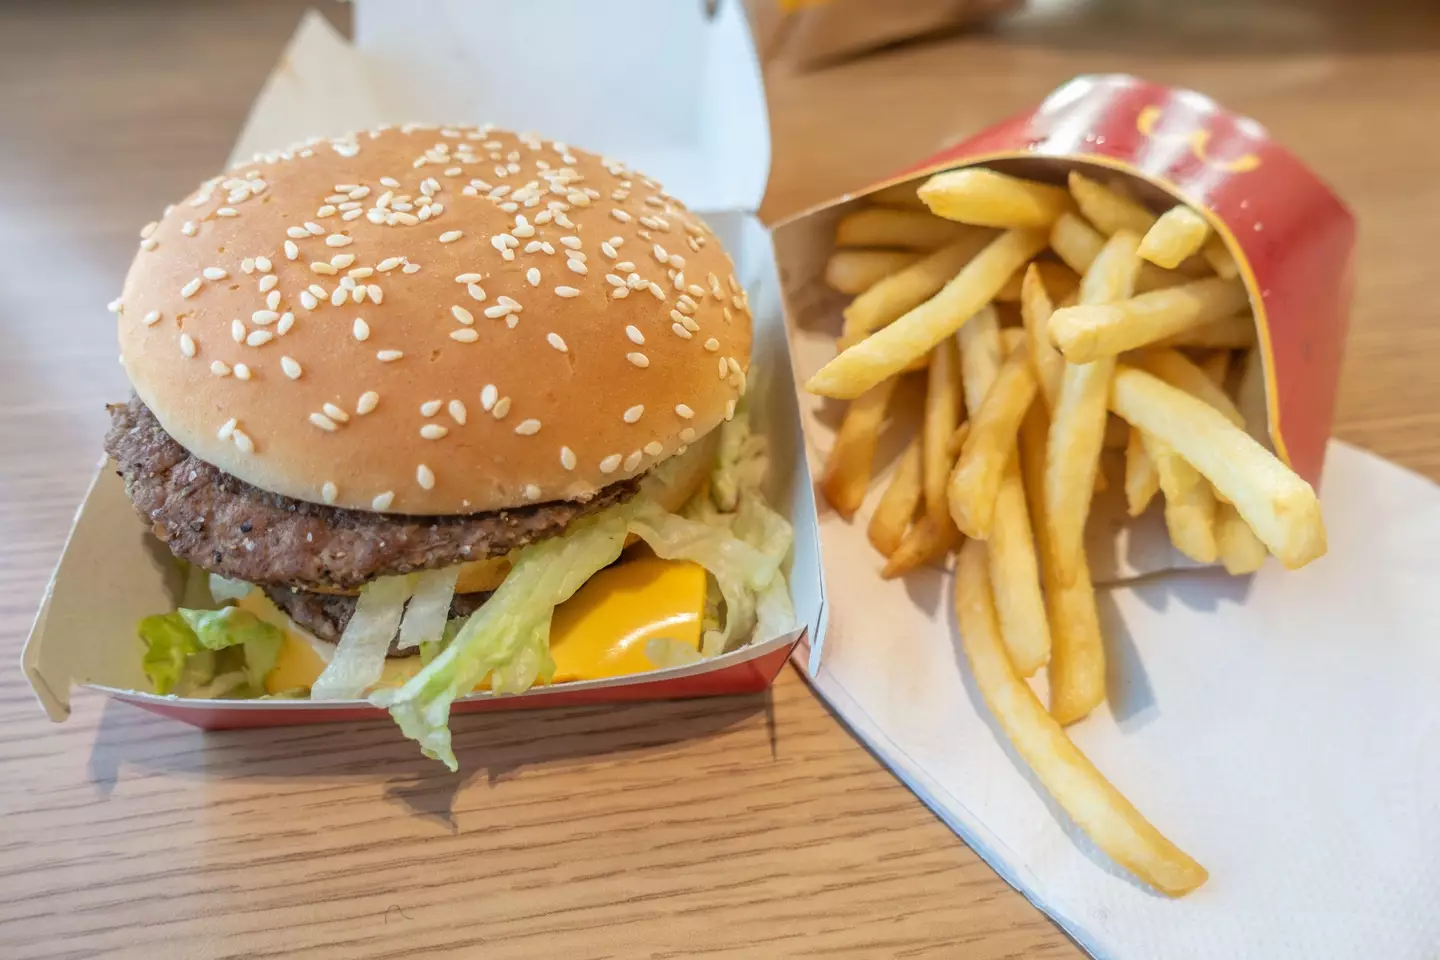 Did you know that you can easily snap up a Big Mac and fries for just £1.99 every time you visit McDonald's?